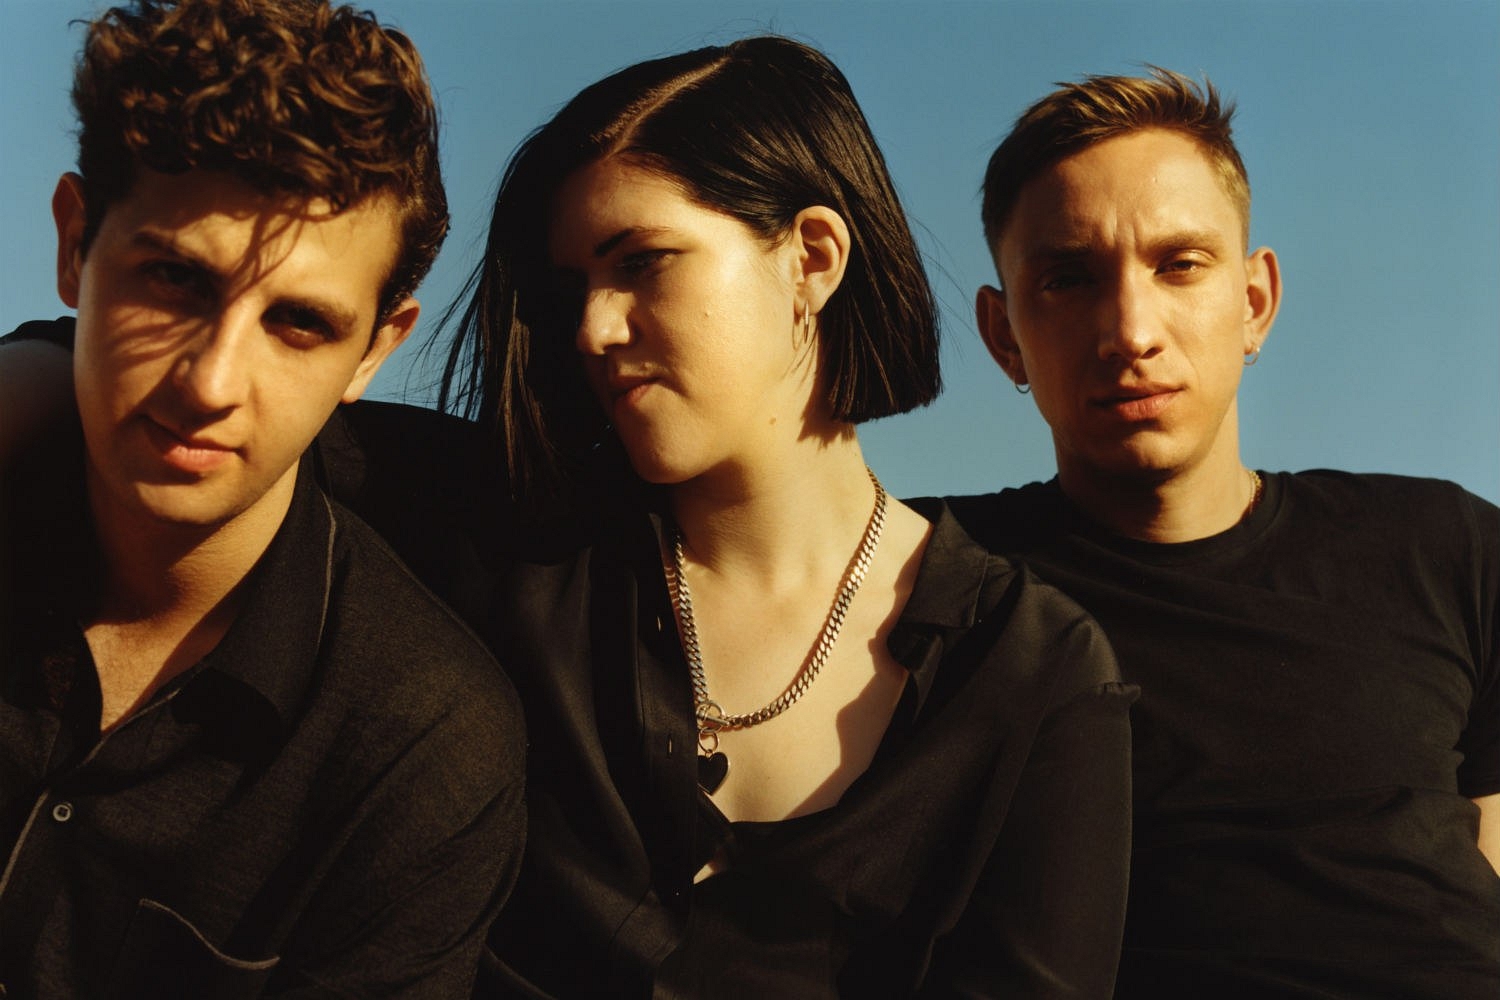 Tracks (The xx, Los Campesinos!, Run the Jewels & More)